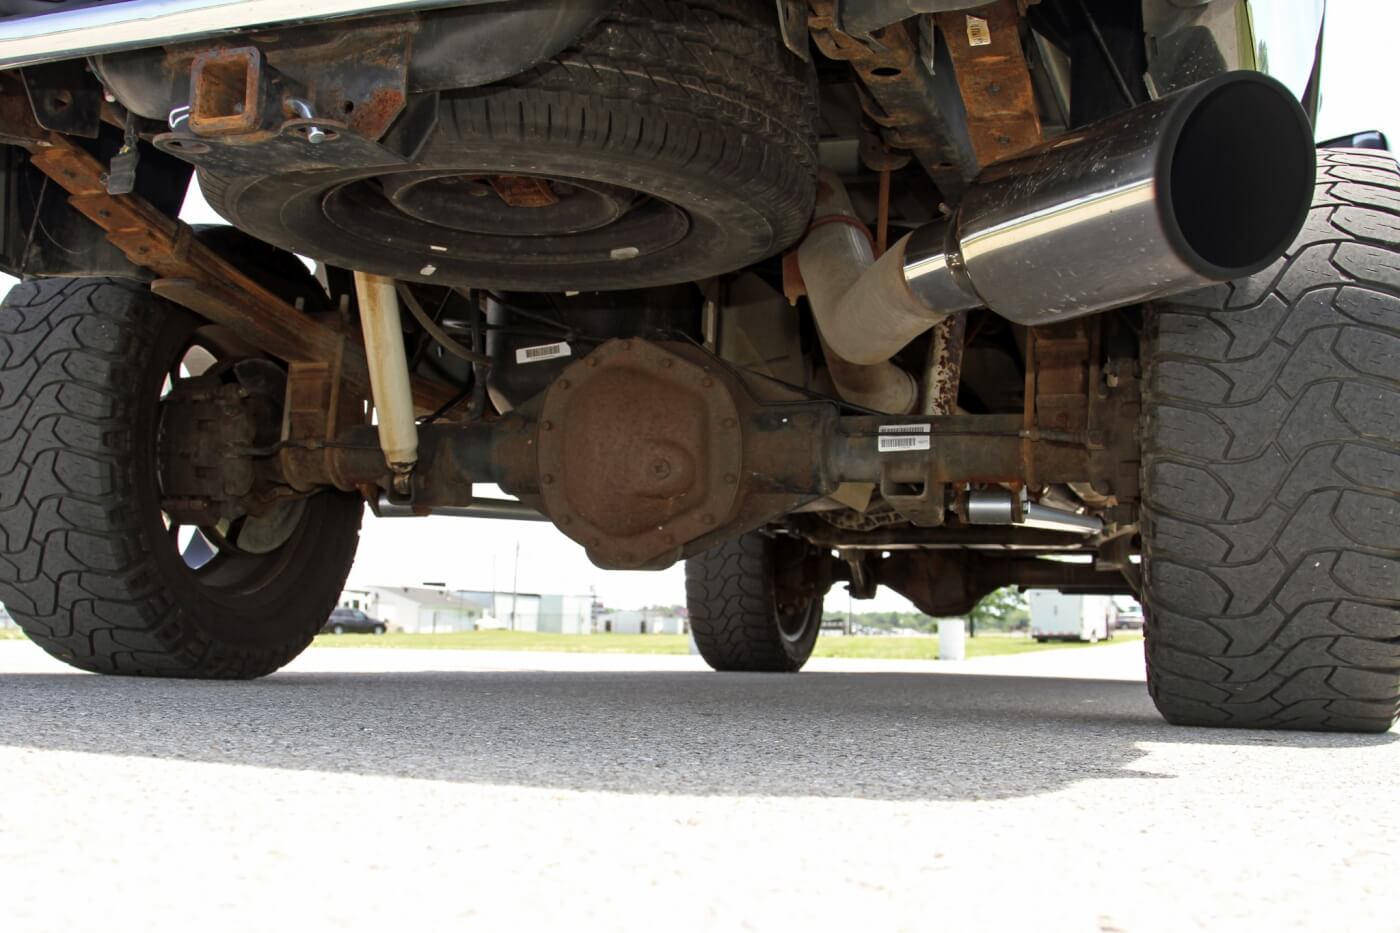 Looking at the rear side of the axle, you can see the 4-inch exhaust system capped off with a 7-inch polished tip.